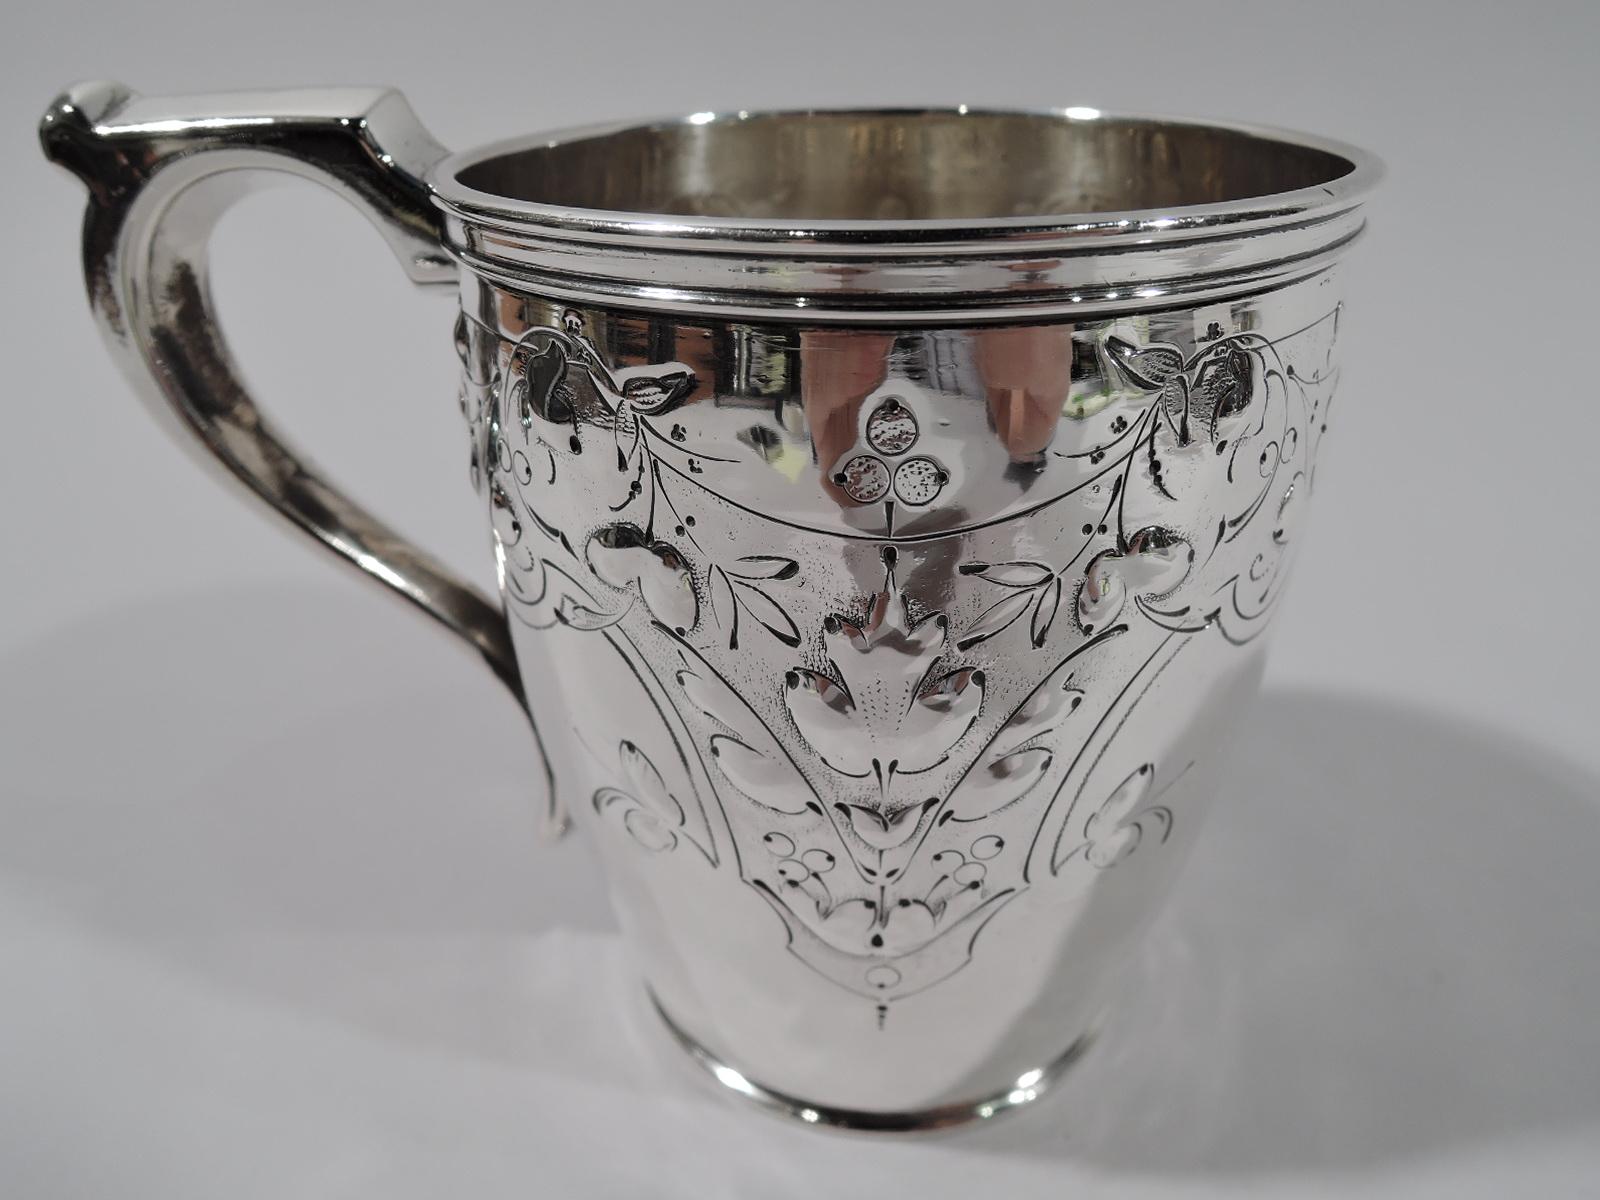 American Pretty Coin Silver Baby Cup by Krider & Biddle of Philadelphia